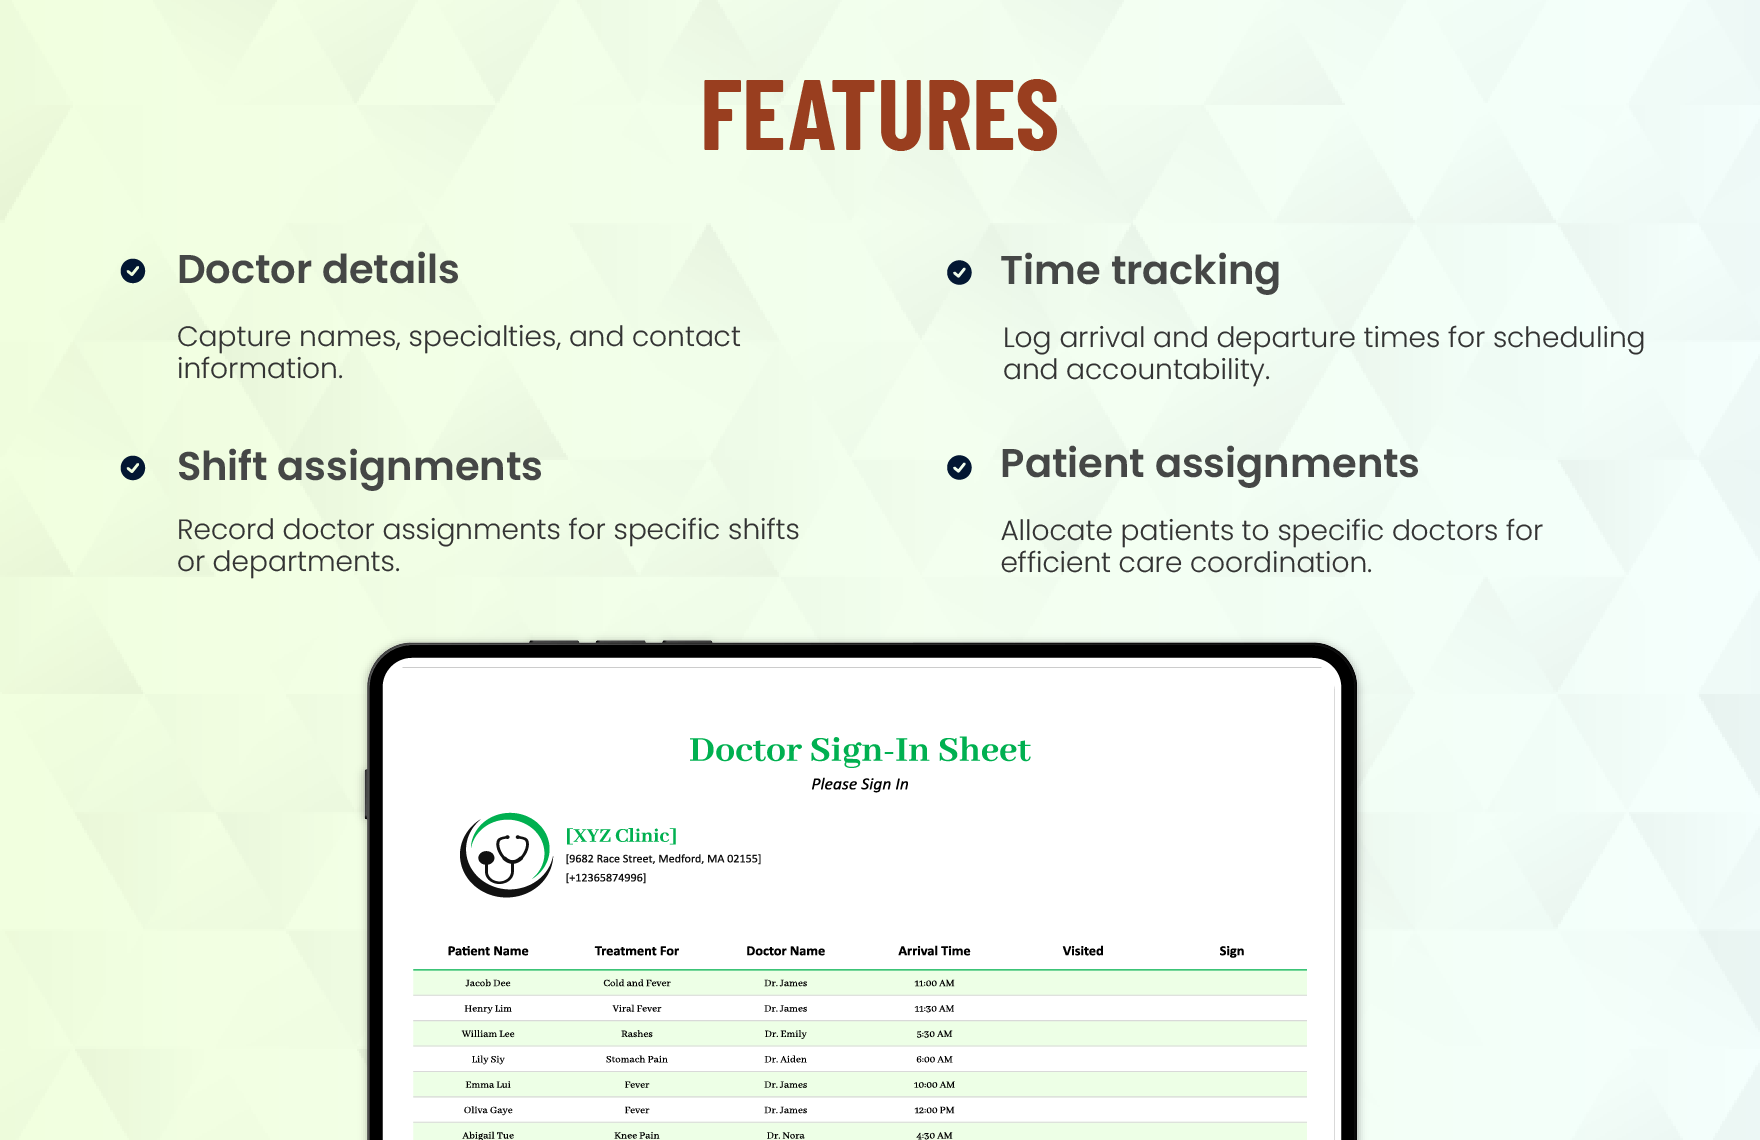 Doctor Sign In Sheet Template